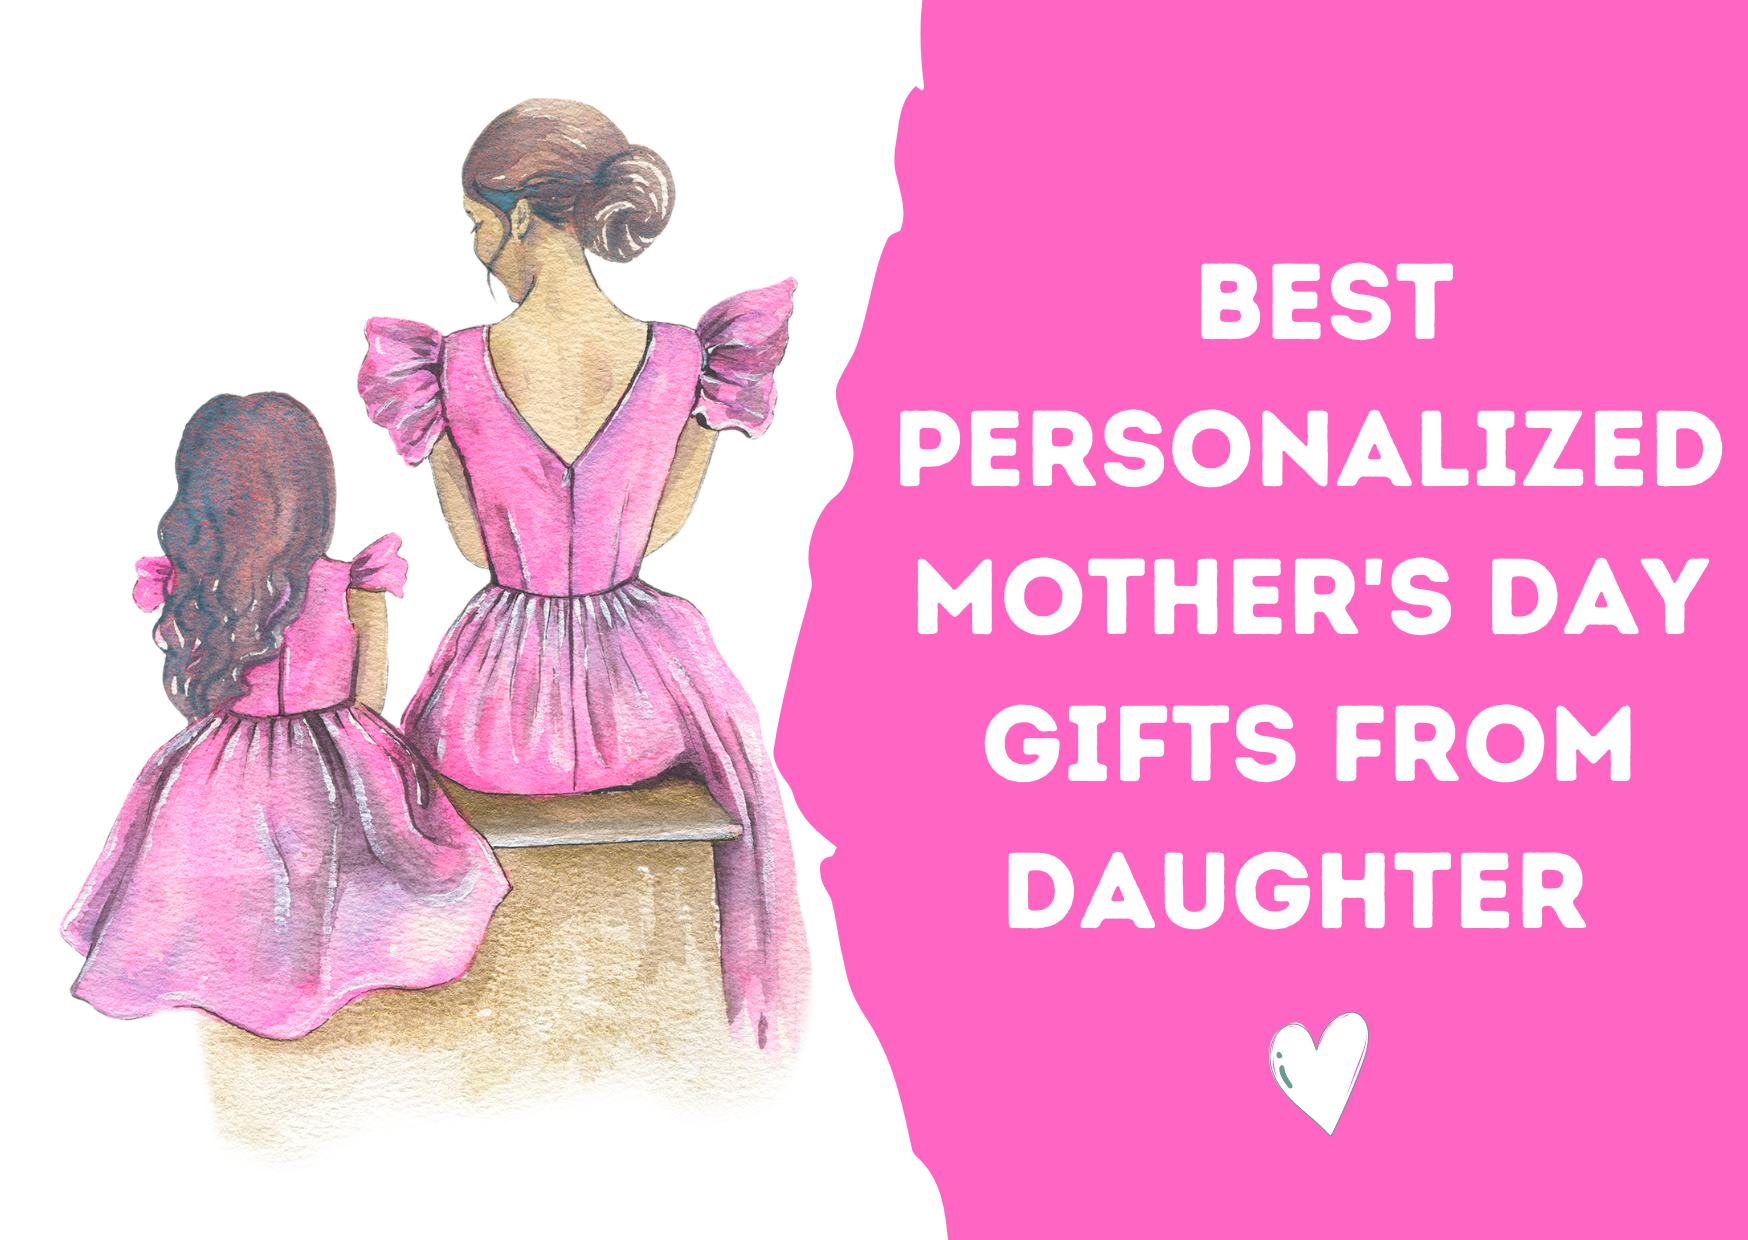 Best Personalized Mother's Day Gifts From Daughter To Surprise Your Loving Mom